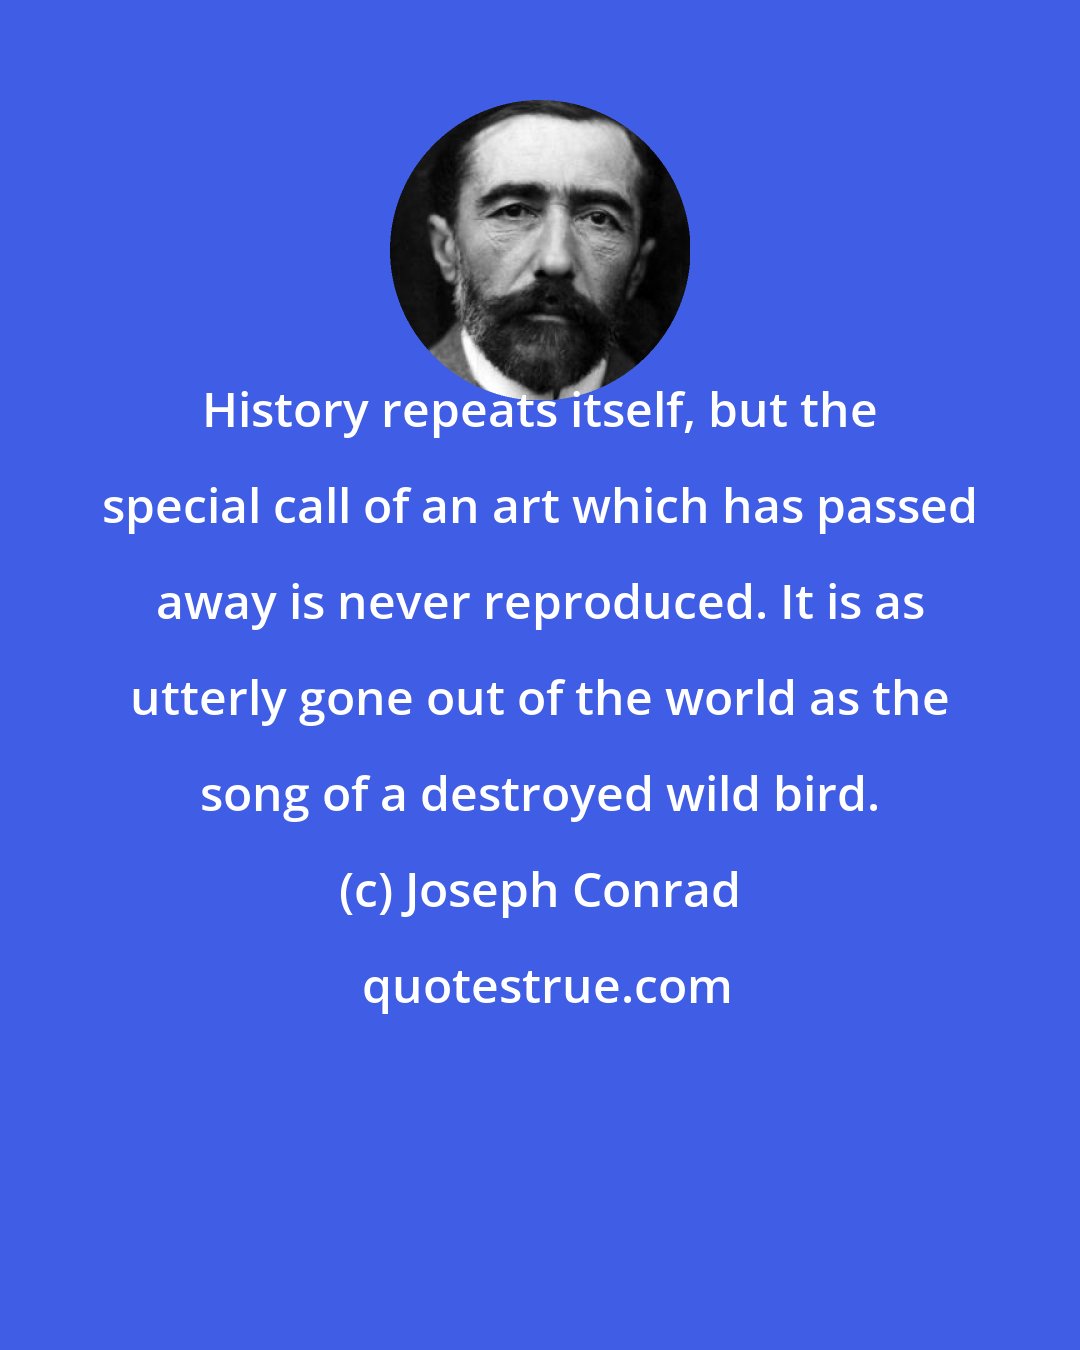 Joseph Conrad: History repeats itself, but the special call of an art which has passed away is never reproduced. It is as utterly gone out of the world as the song of a destroyed wild bird.